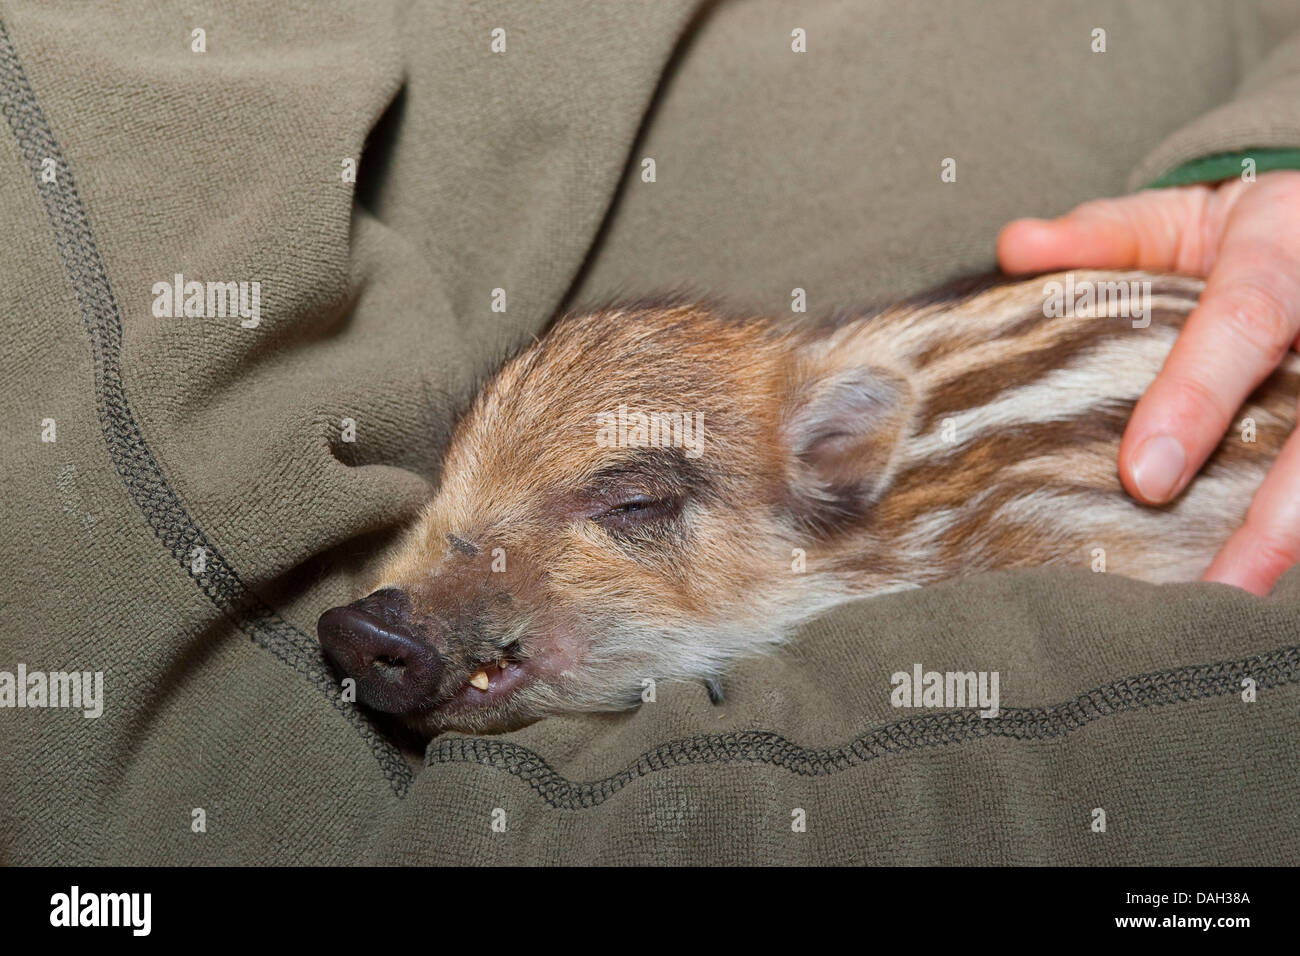 wild boar, pig, wild boar (Sus scrofa), orphaned tame runt lying in ones arms, Germany Stock Photo